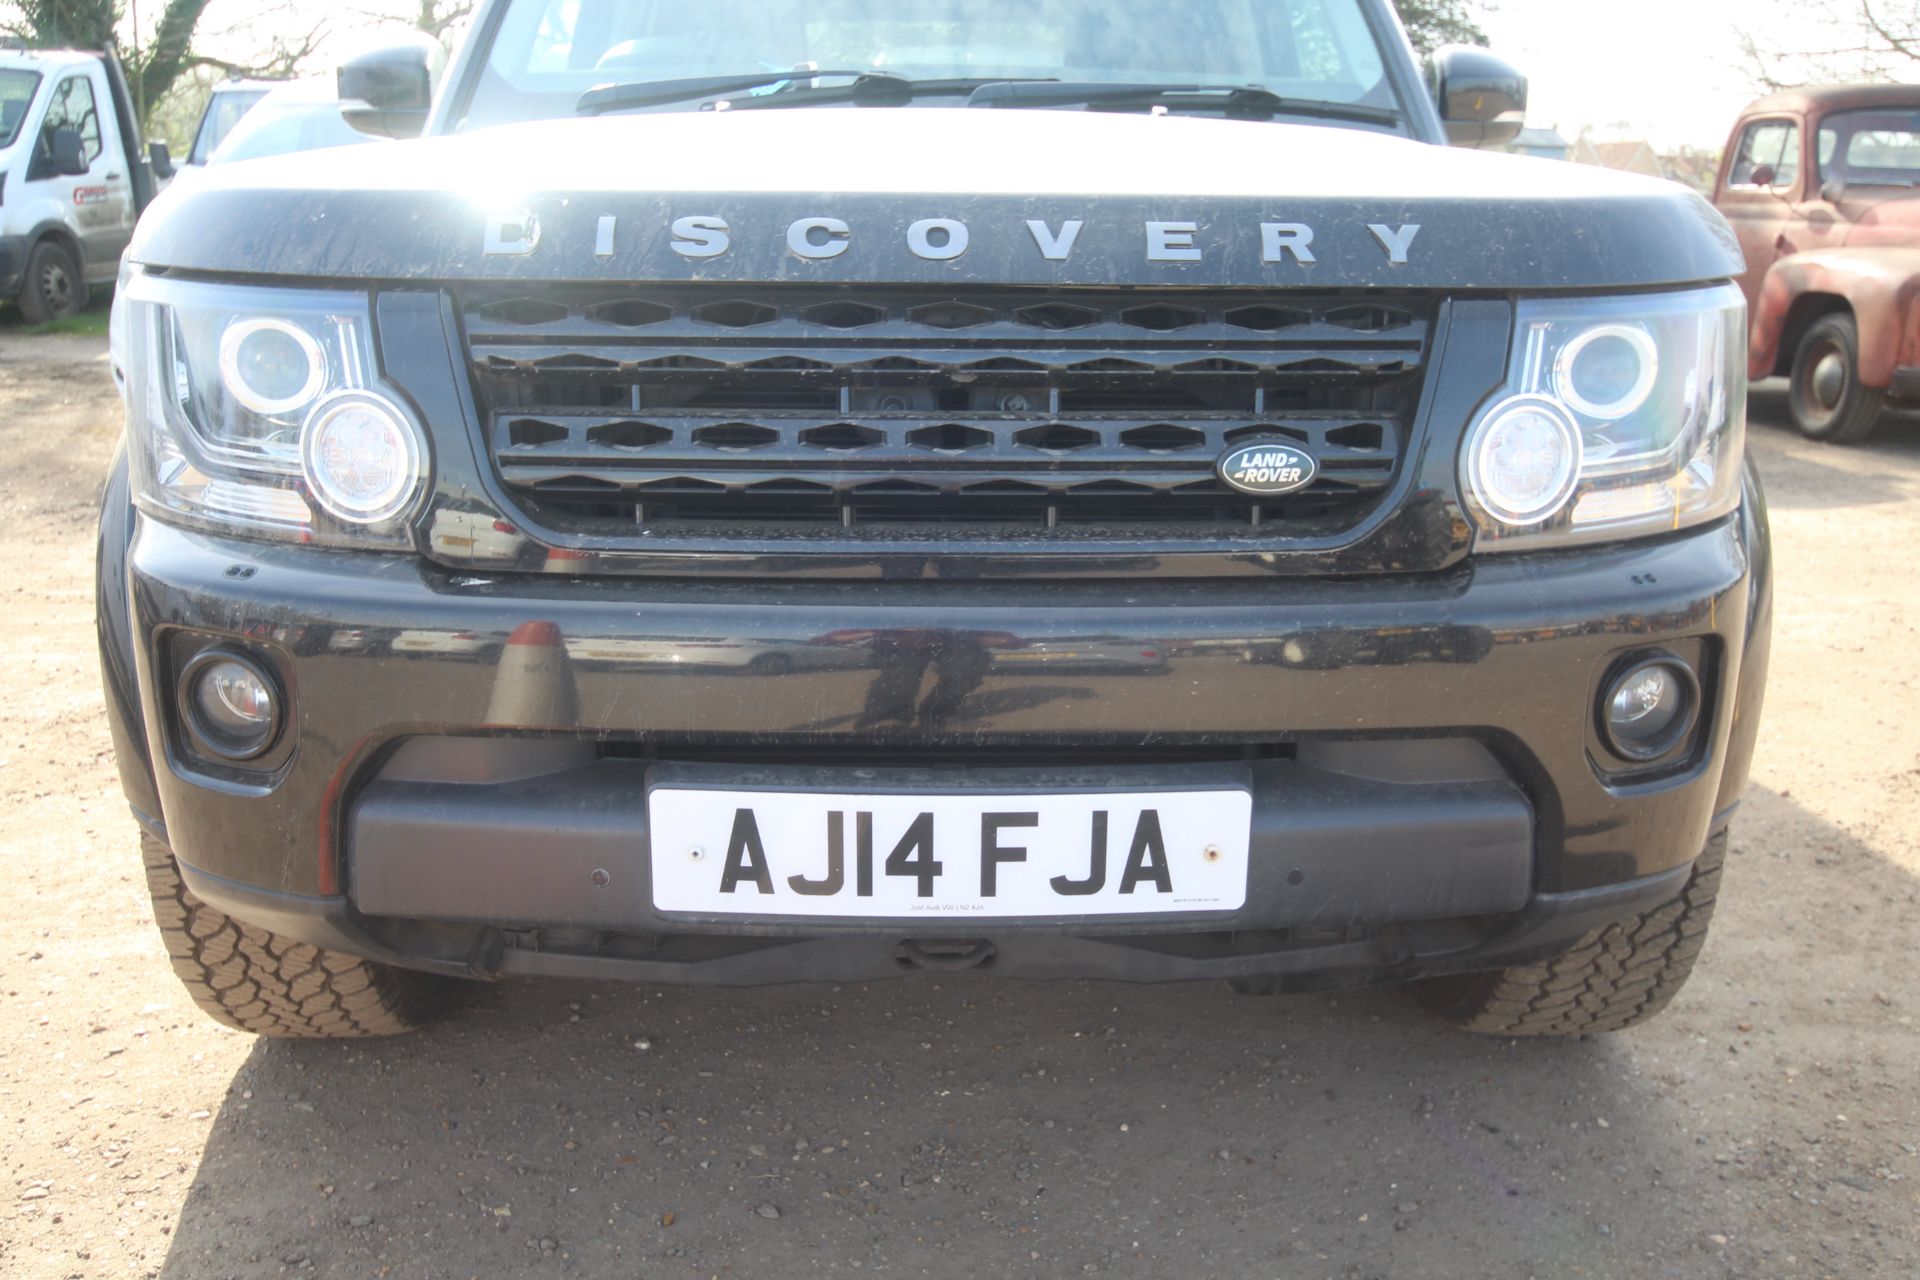 Land Rover Discovery 4 3.0L diesel Commercial. Registration AJ14 FJA. Date of first registration - Image 5 of 65